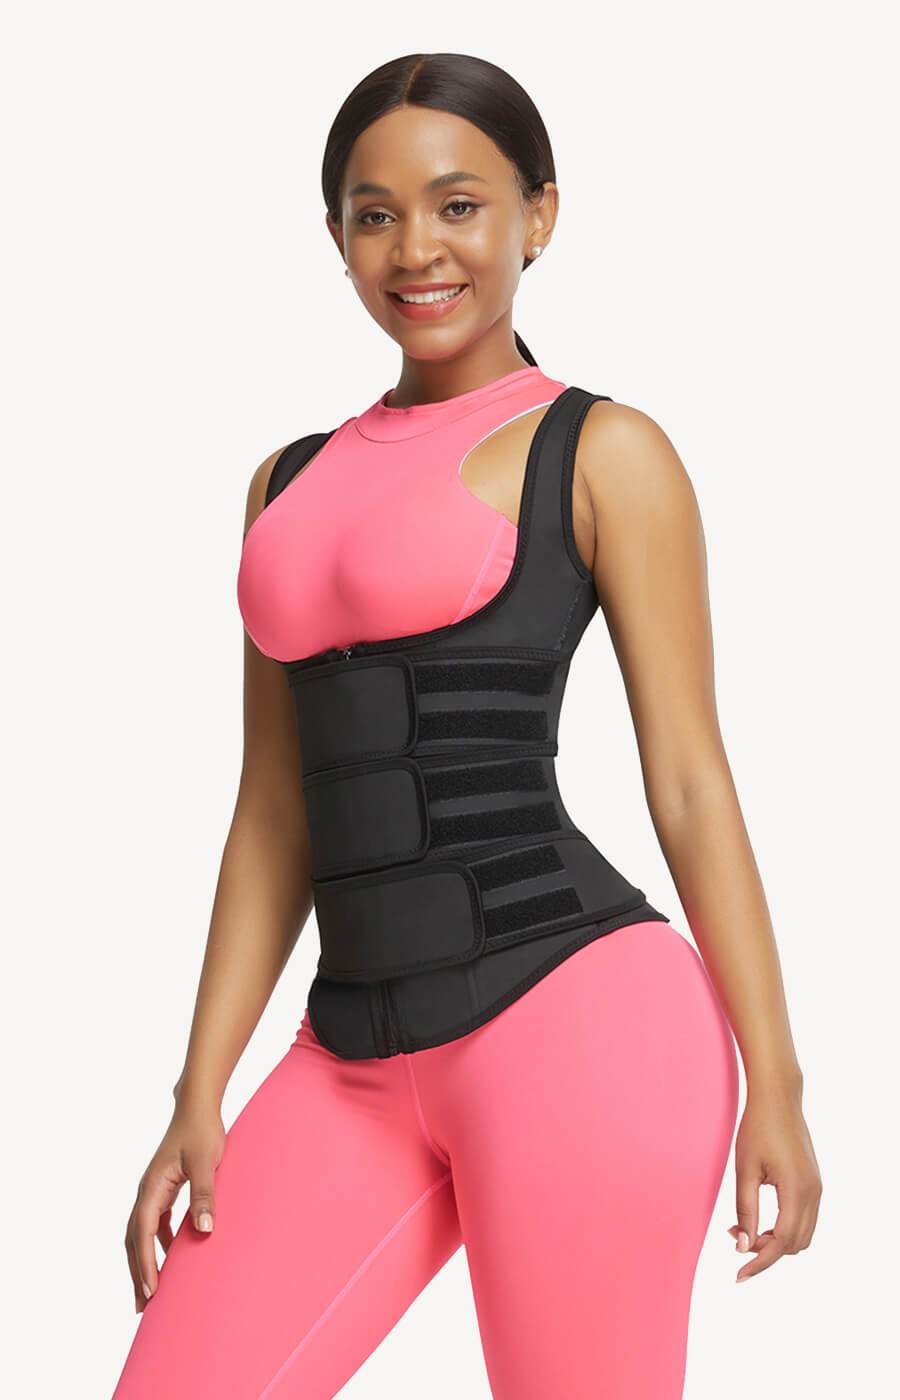 5 Staff Picked Shapellx Waist Trainer and Shapewear 2021